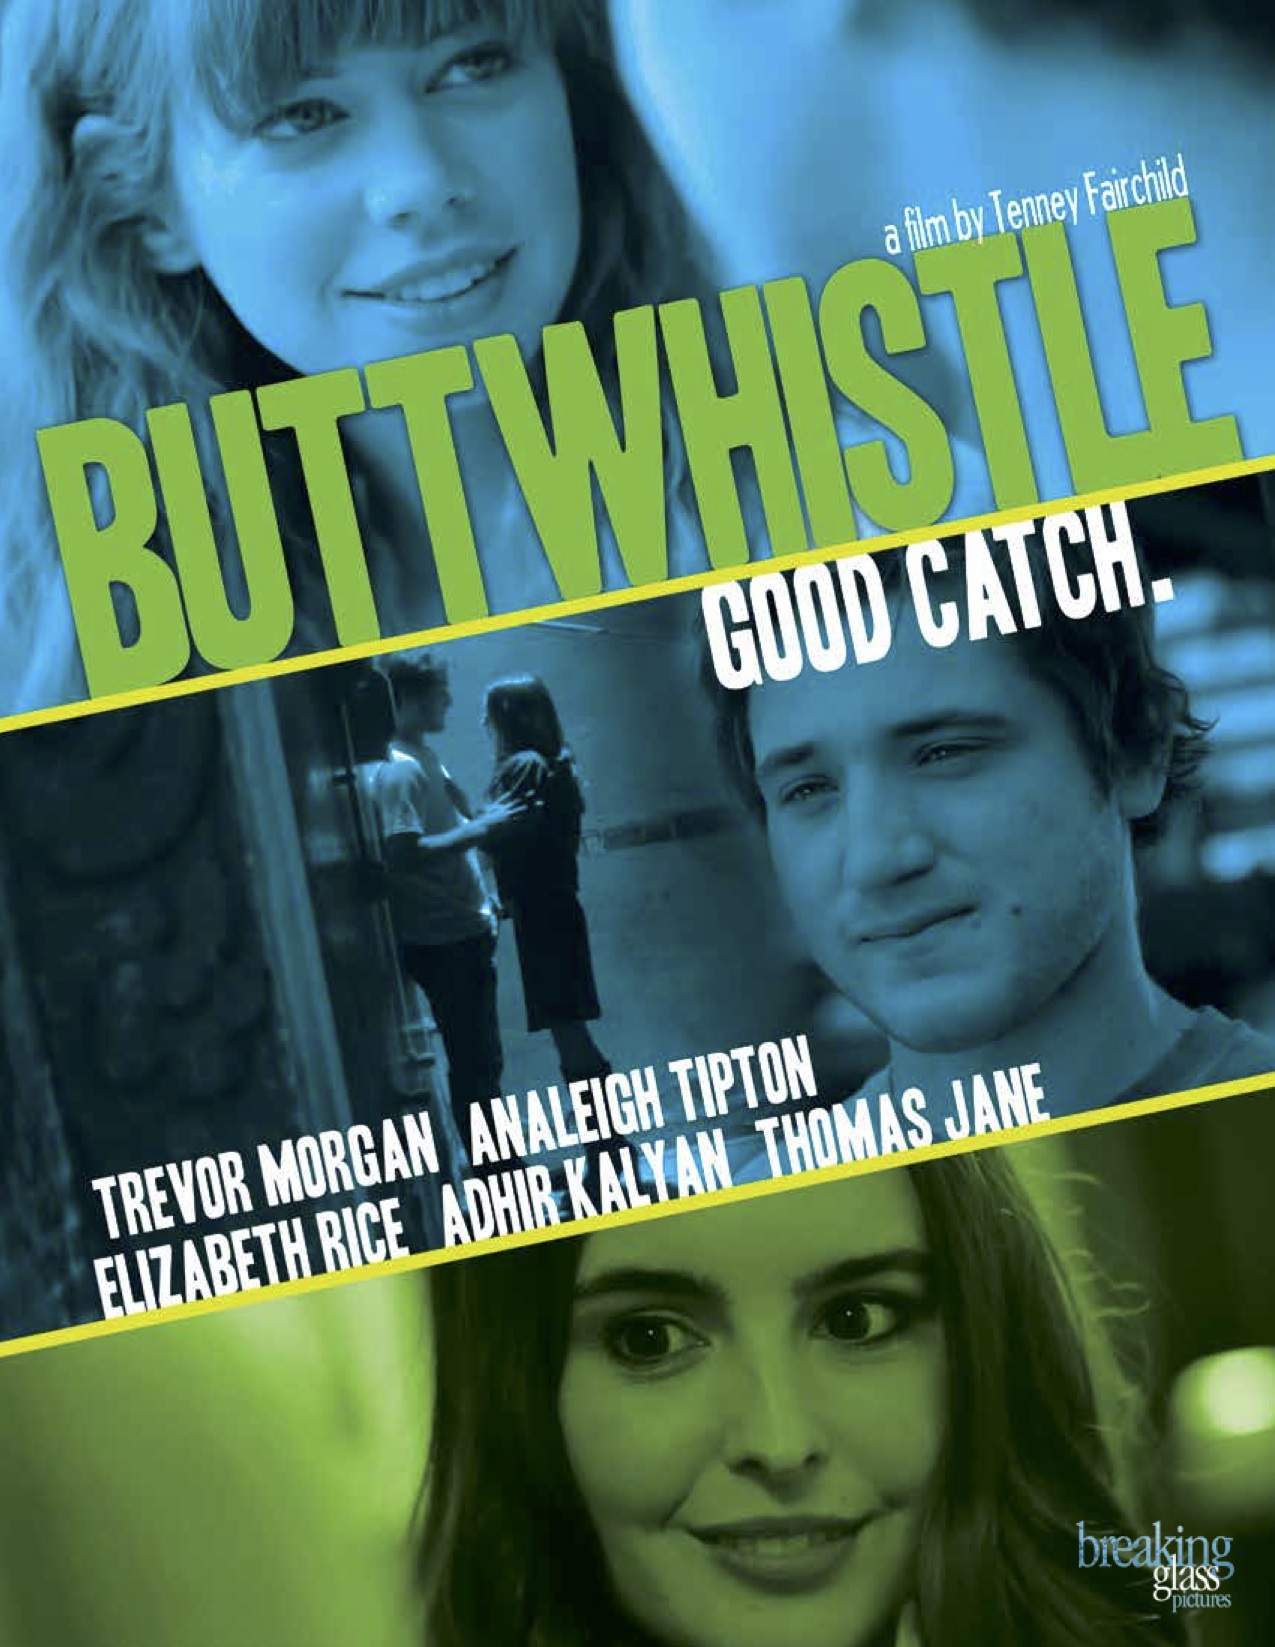 Trevor Morgan, Elizabeth Rice and Analeigh Tipton in Buttwhistle (2014)